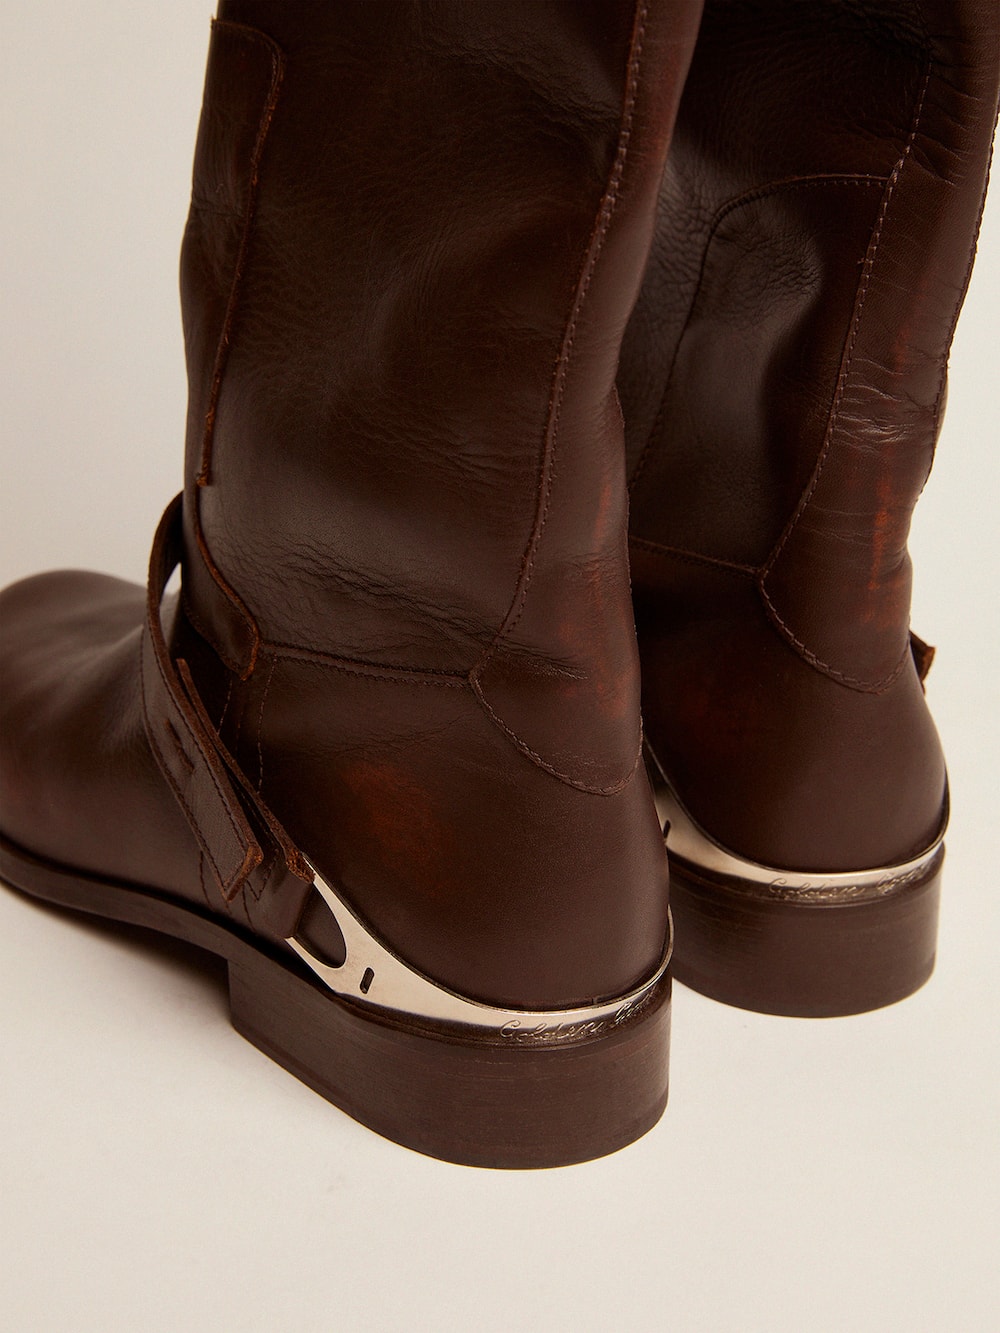 Golden Goose - Women's Charlie boots in dark brown leather and clamp on the heel in 